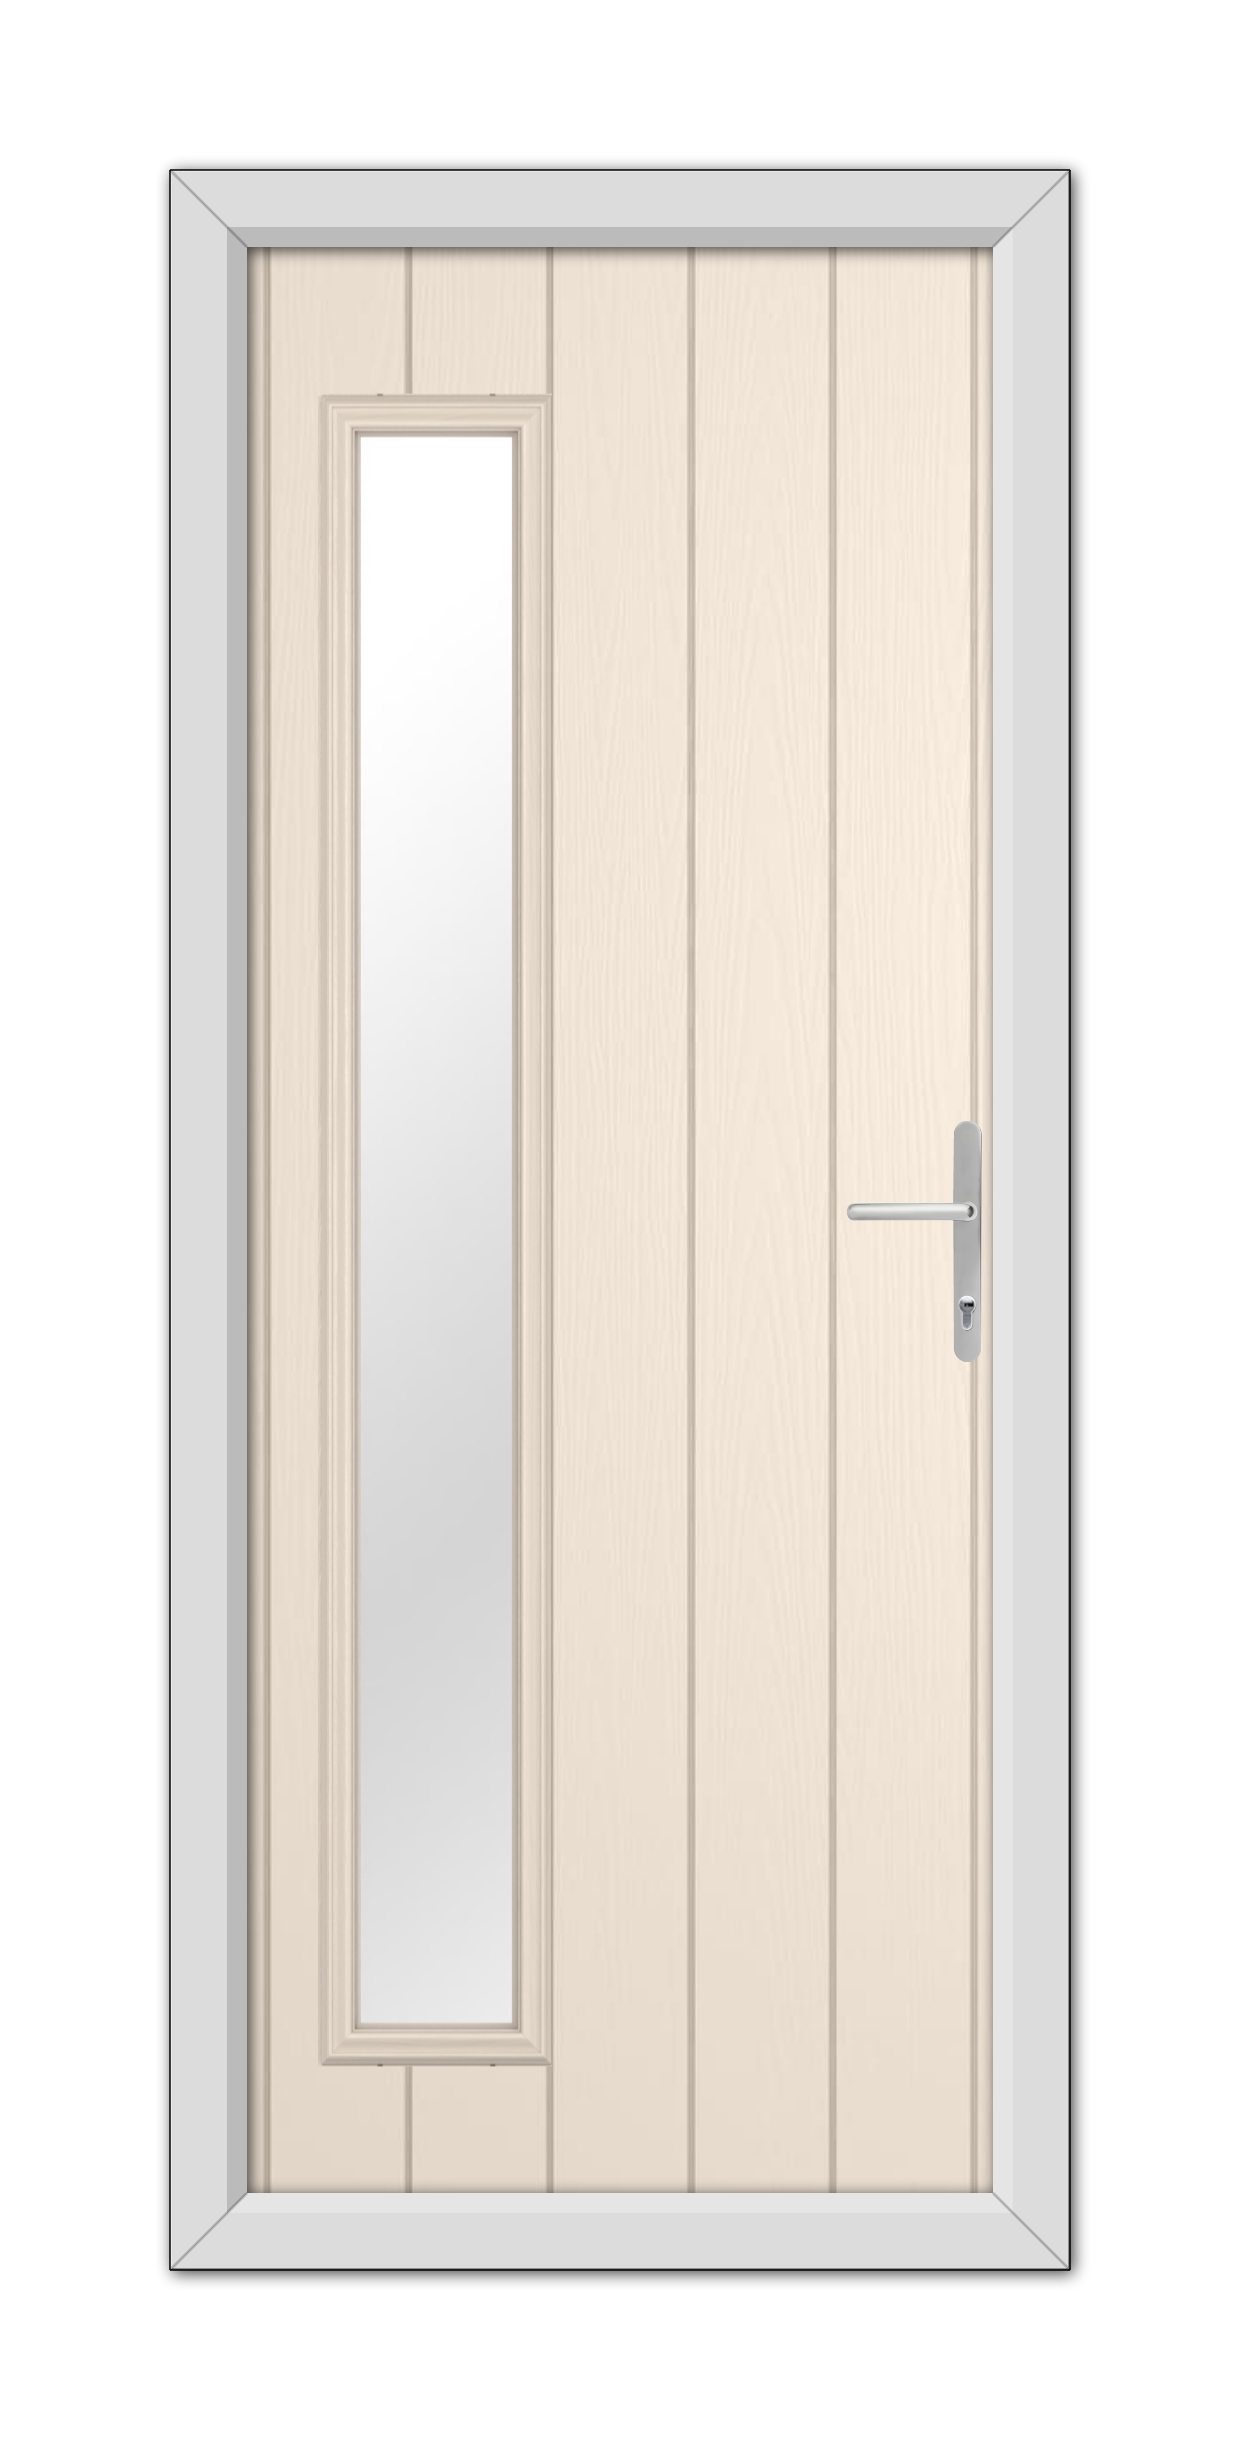 A Cream Sutherland Composite Door 48mm Timber Core with a vertical glass panel on the left side, equipped with a metallic handle, framed in a gray doorway.